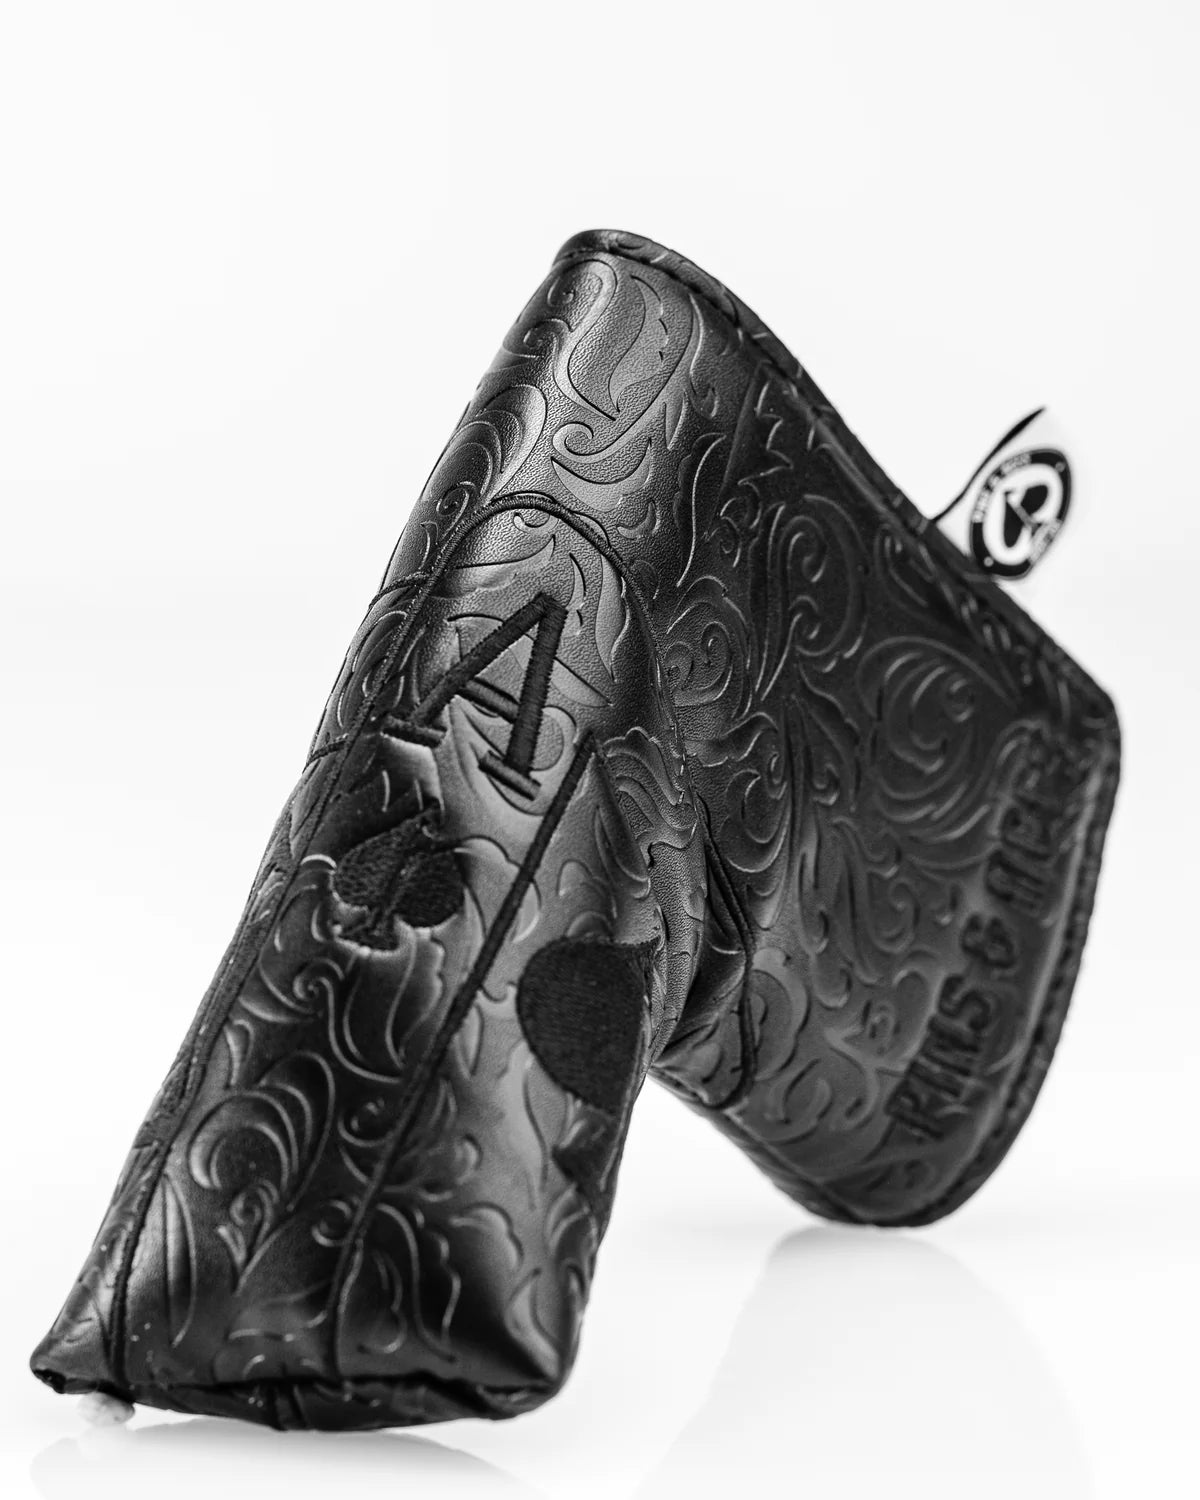 Blackout Ace Of Spades - Blad Putter Headcover